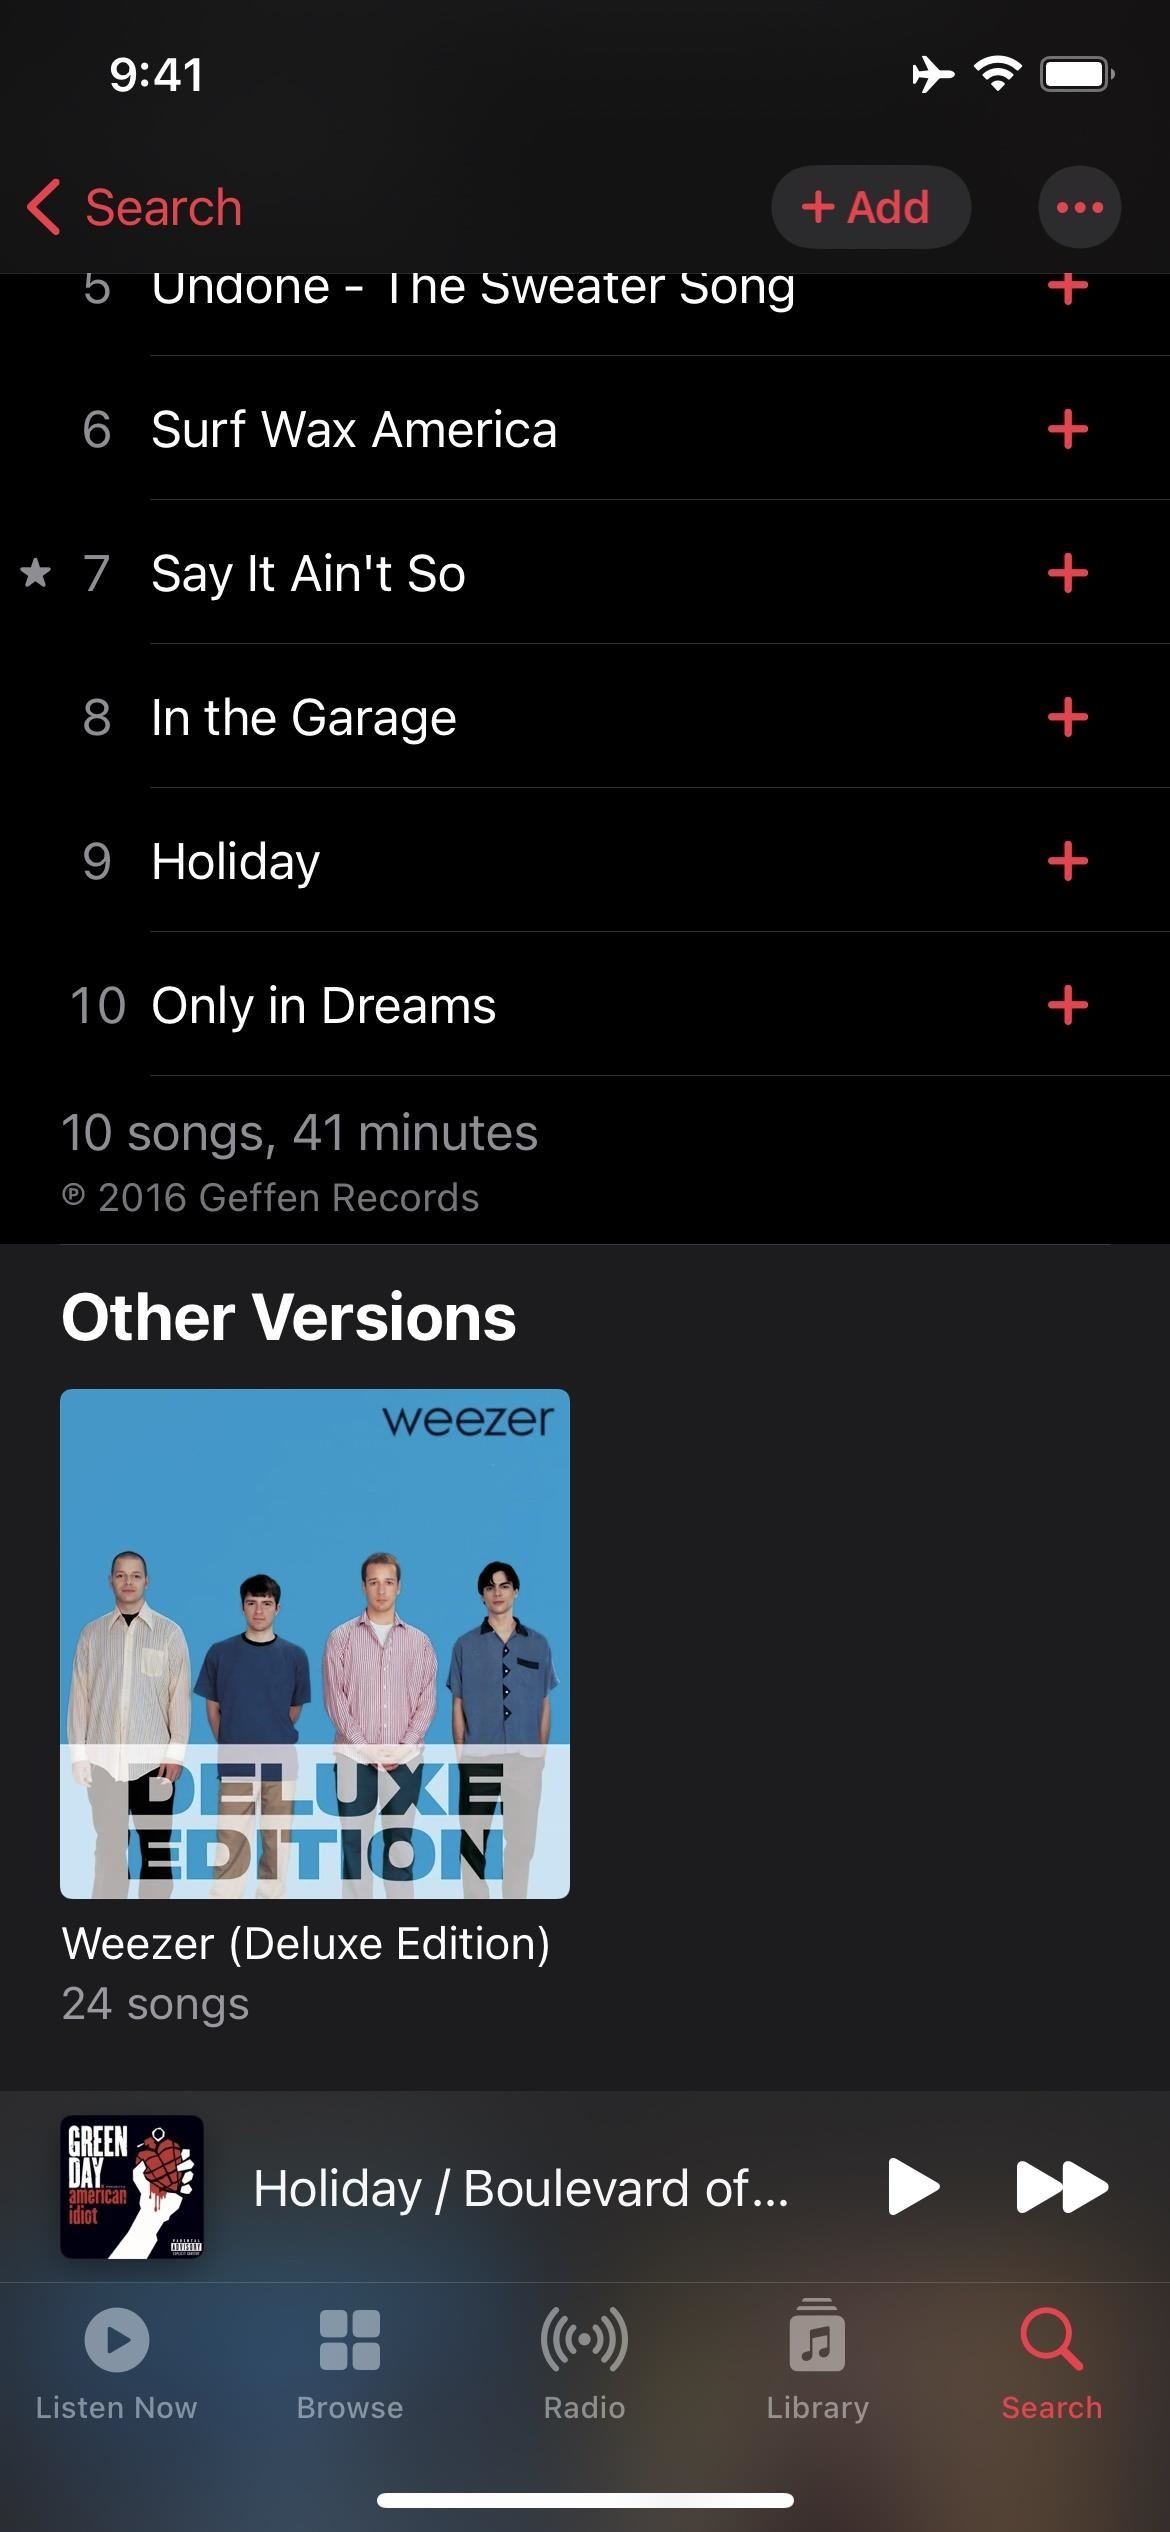 7 cool features iOS 14.5 adds to your iPhone's music app - for Apple Music and your own library